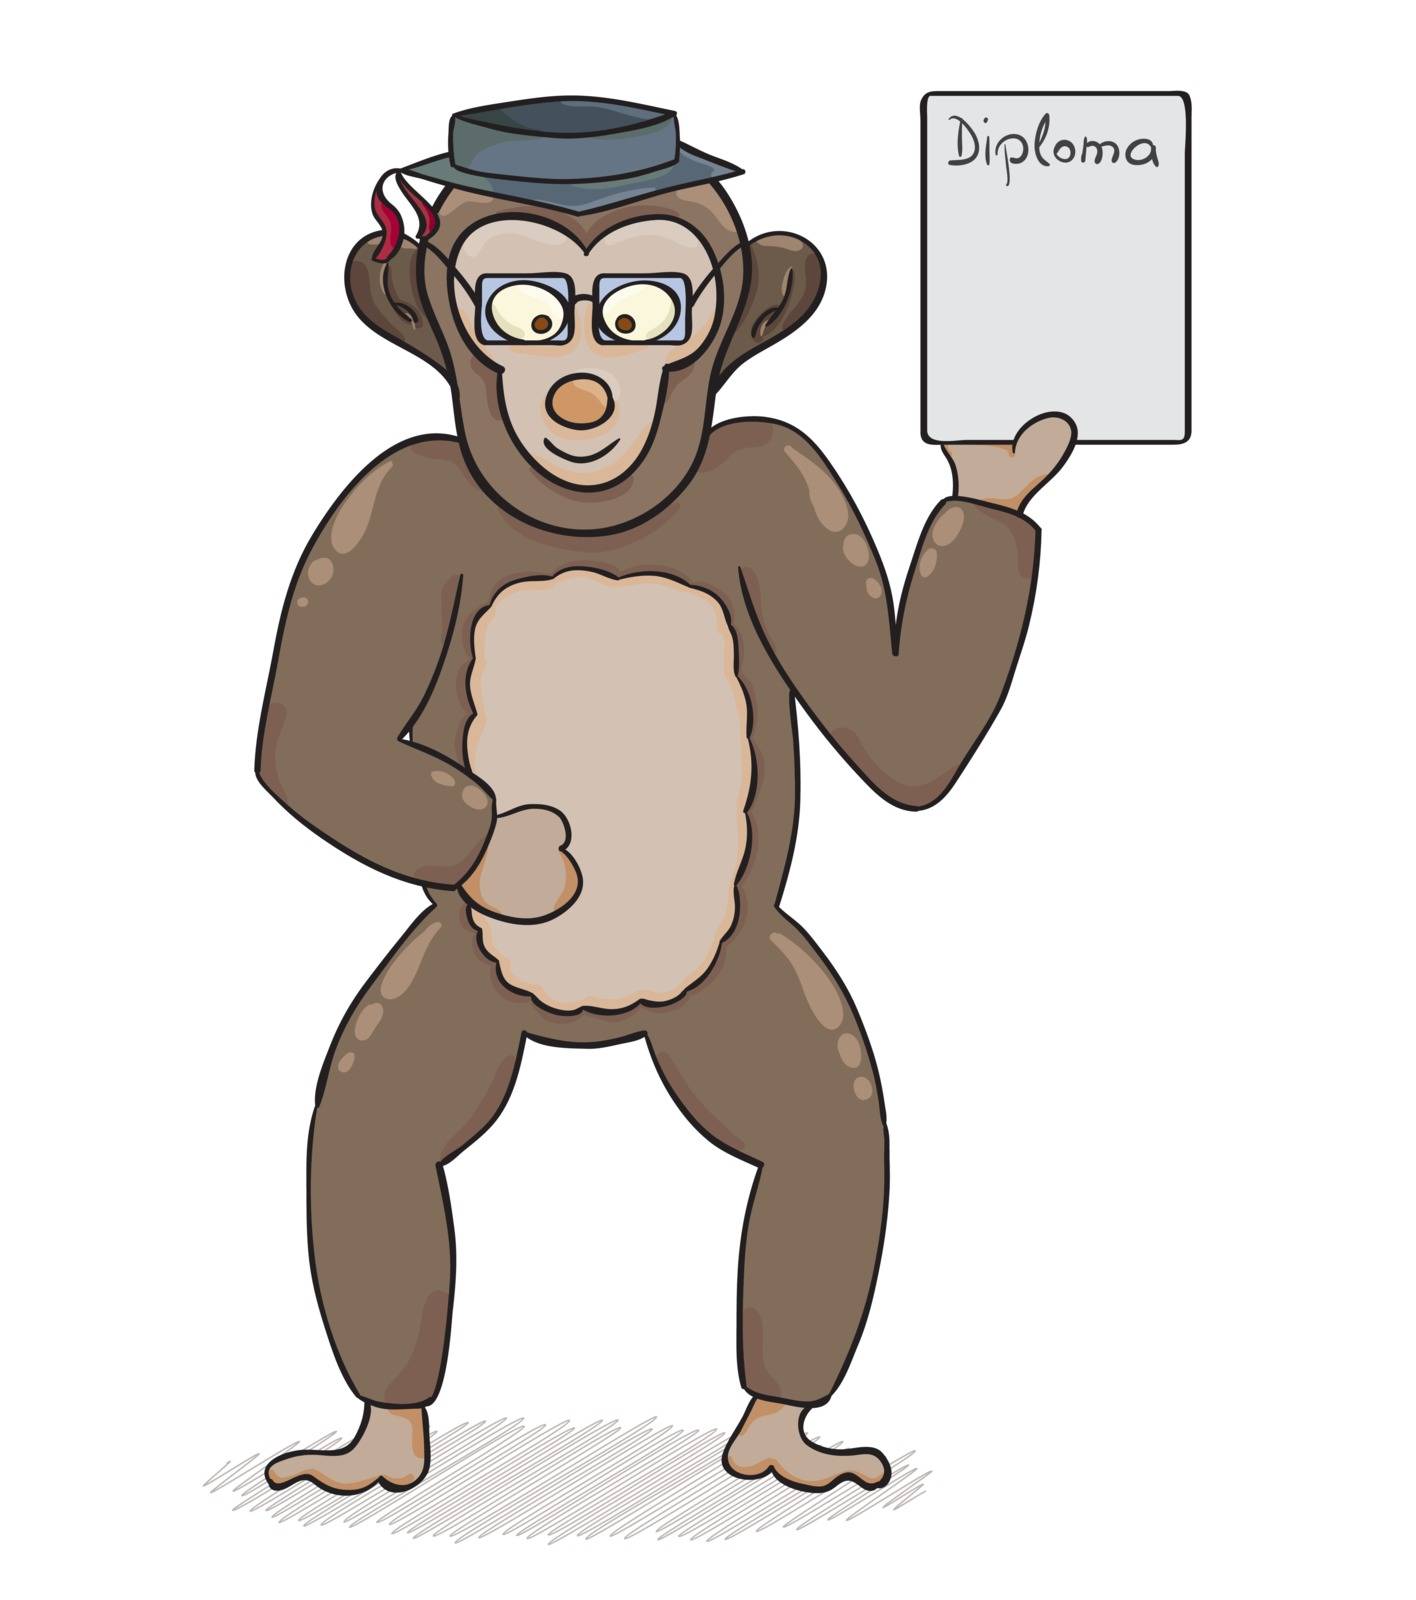 Clever monkey with glasses and diploma. Cartoon illustration.